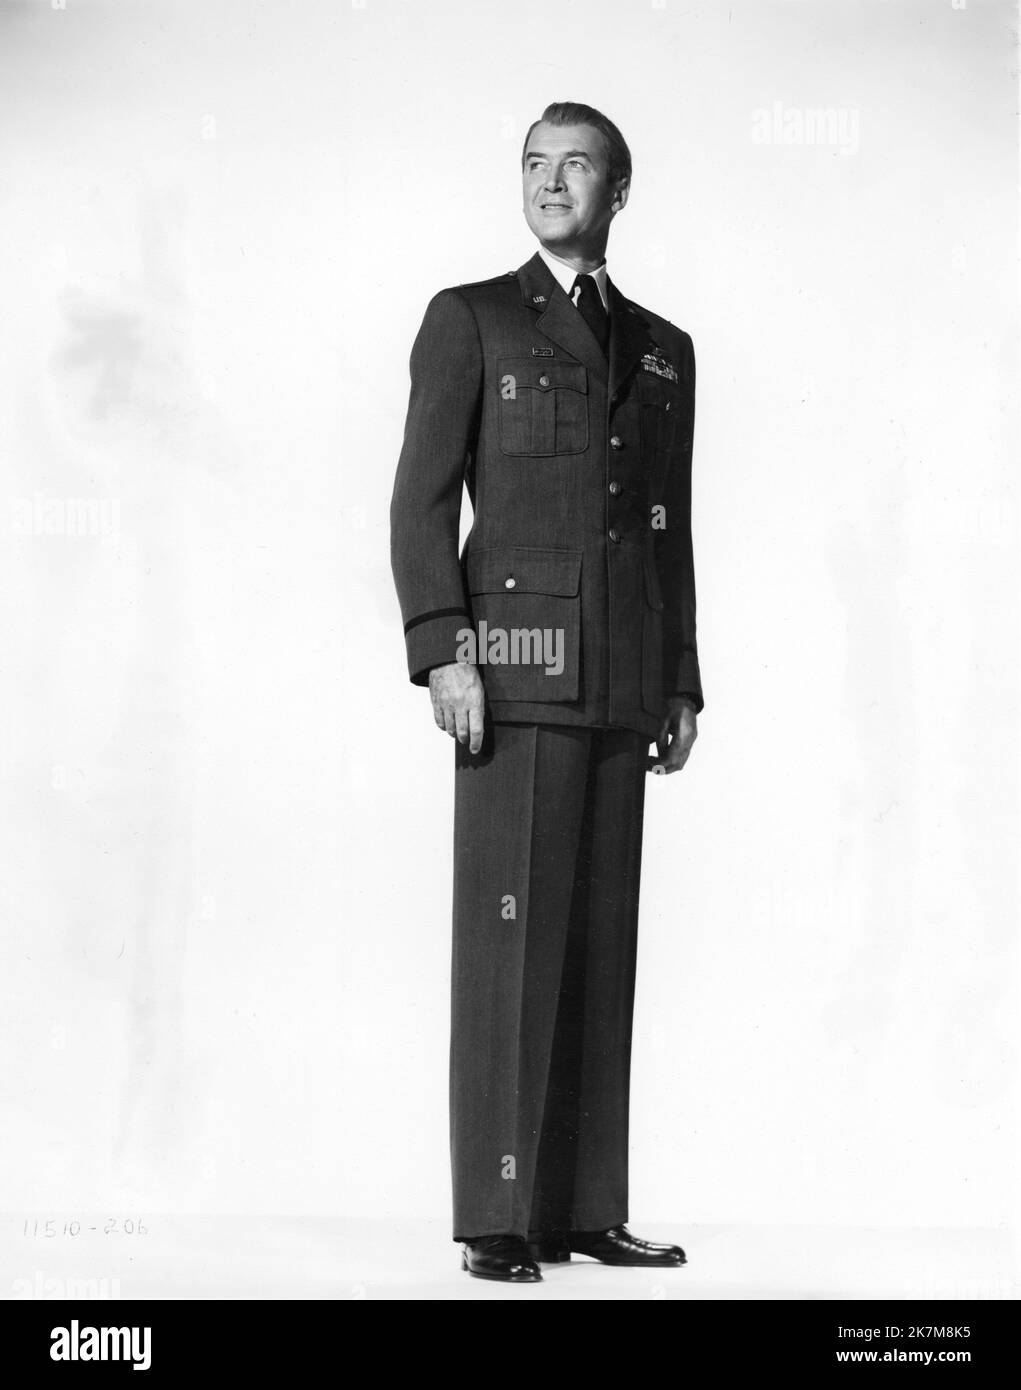 JAMES STEWART Full Length Ritratto in ARIA STRATEGICA COMANDO 1955 regista ANTHONY MANN musica Victor Young Paramount Pictures Foto Stock